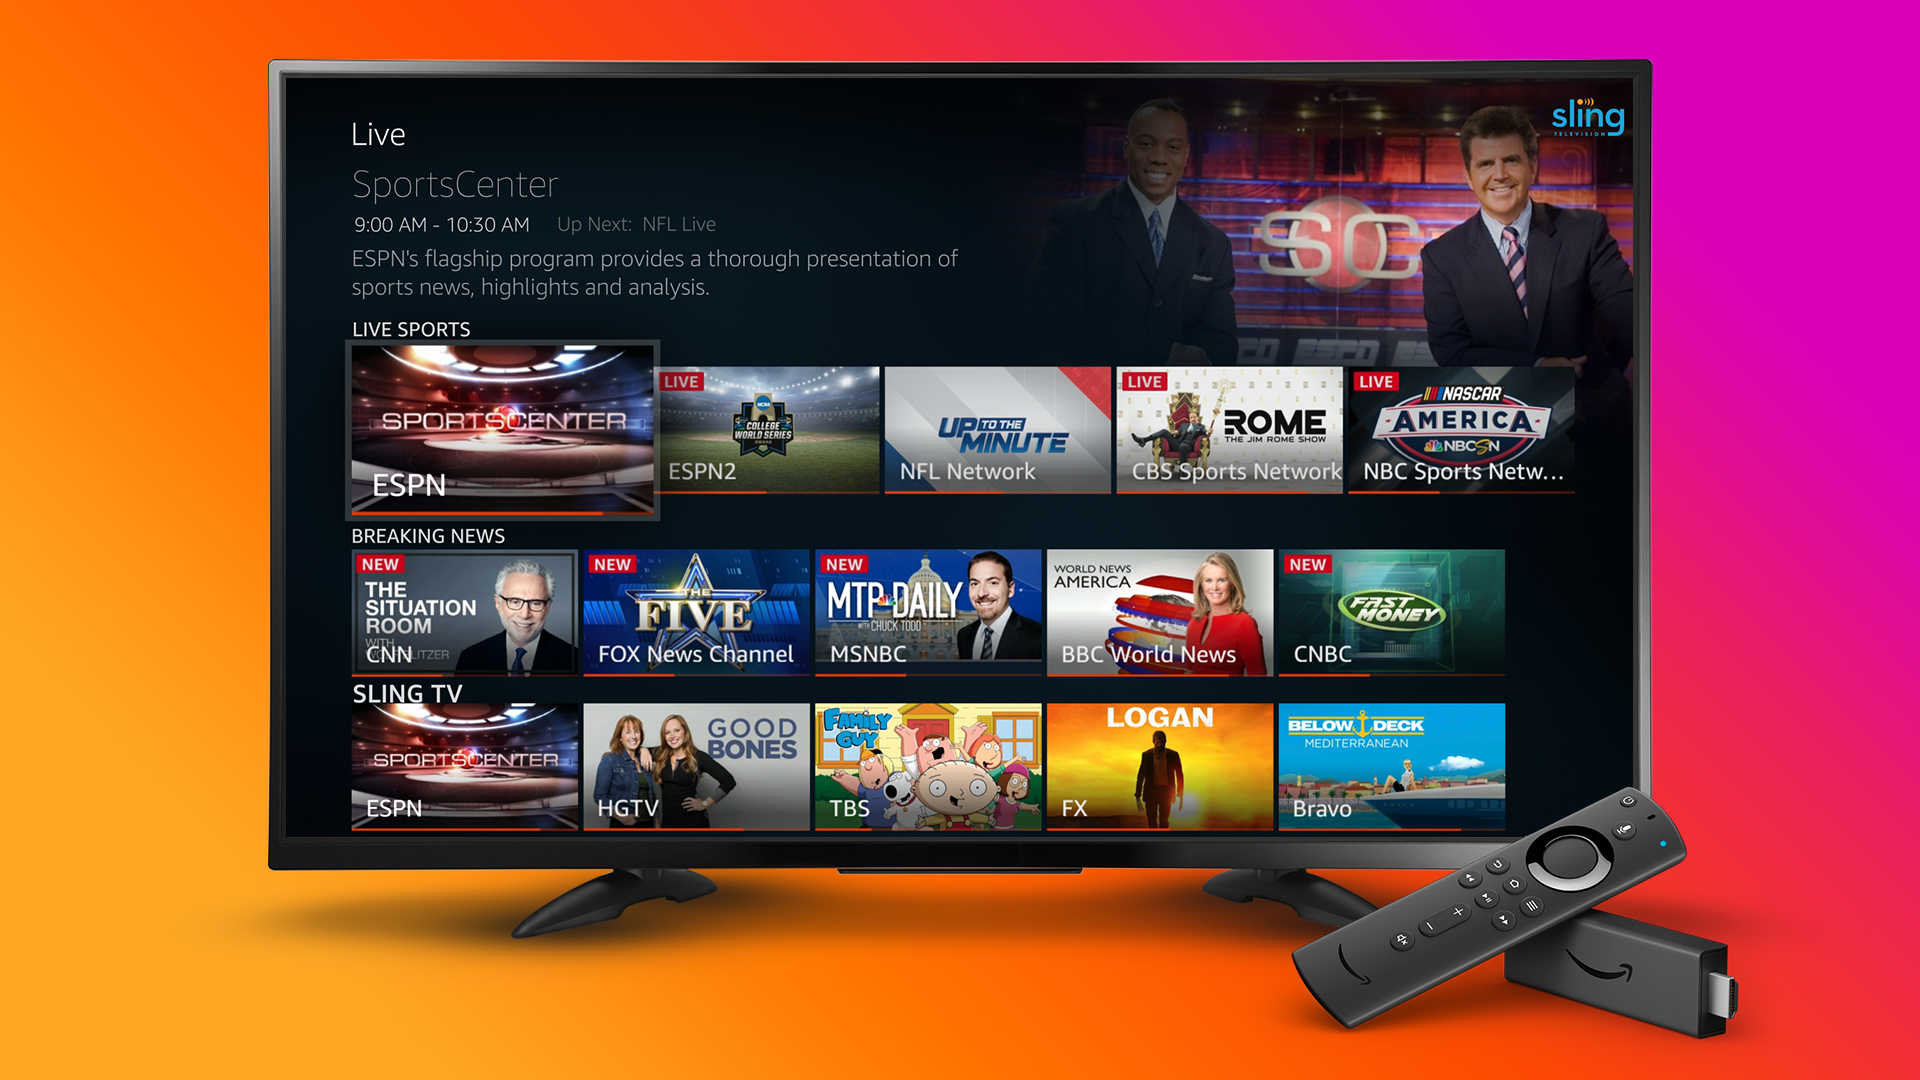 Amazon Fire TV Live now integrates YouTube TV and Sling TV, with Hulu coming soon